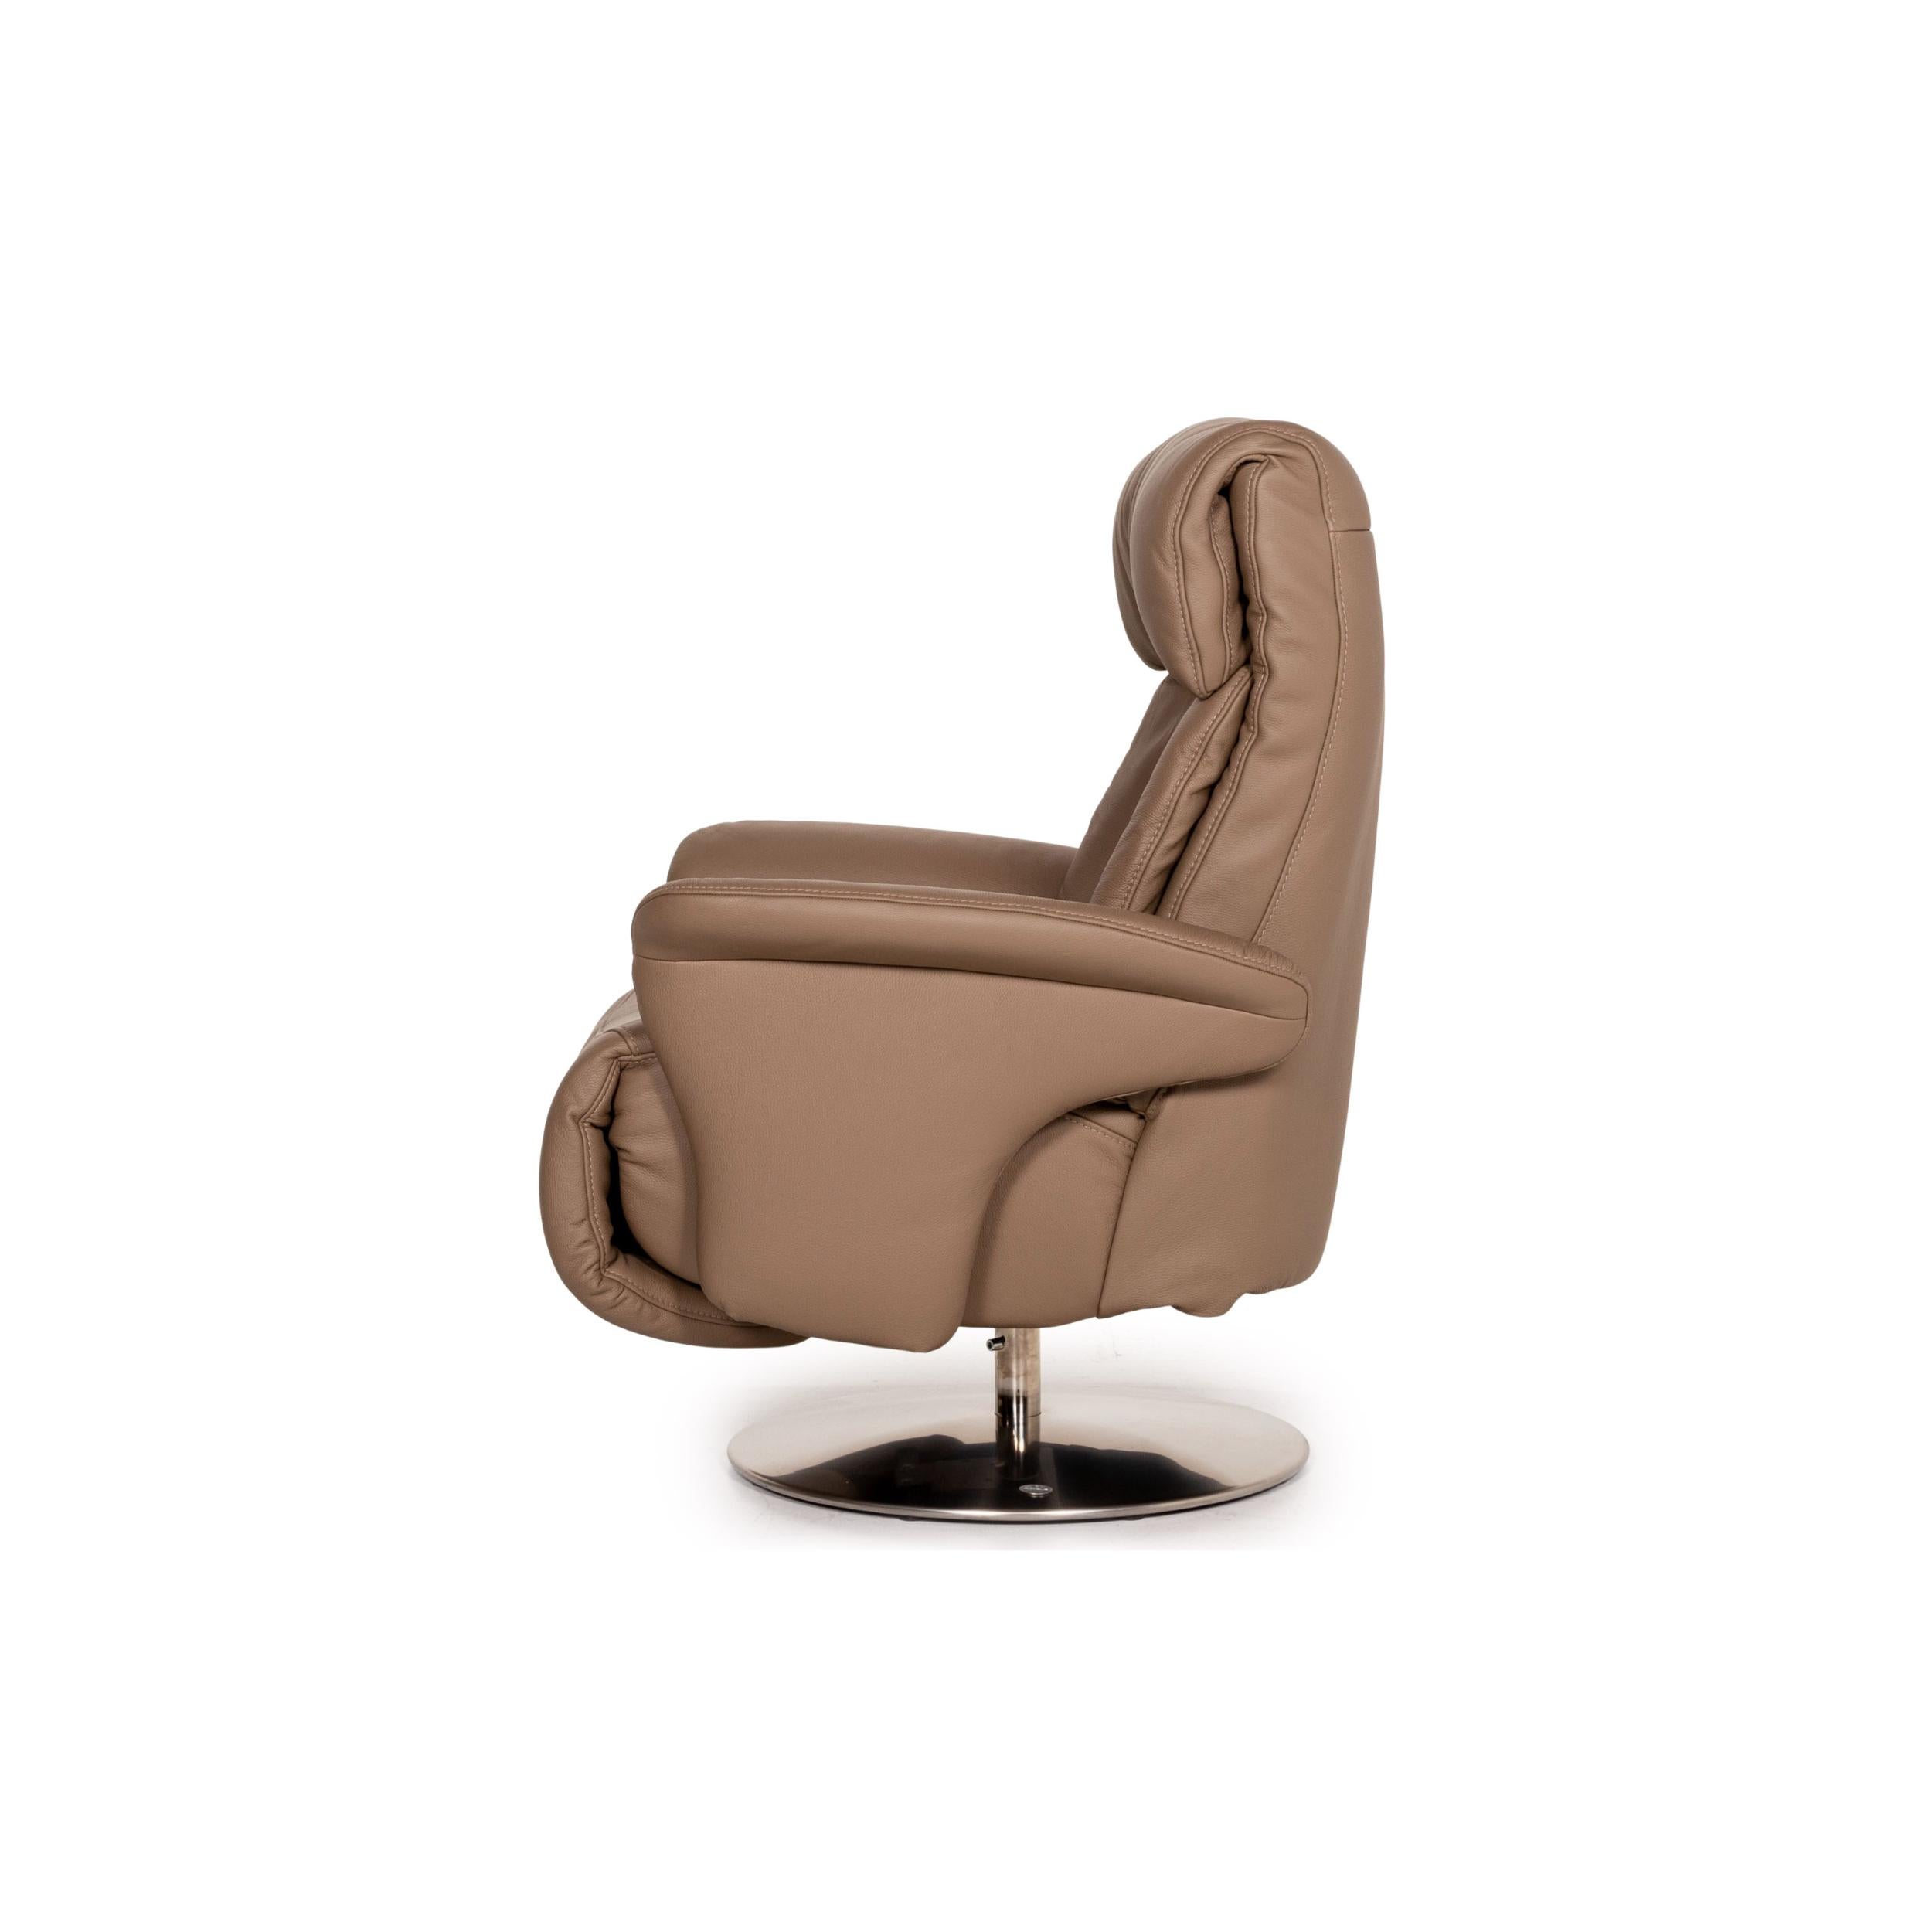 Himolla 7227 Leather Armchair Brown Relaxation Function Function Relaxation For Sale 6